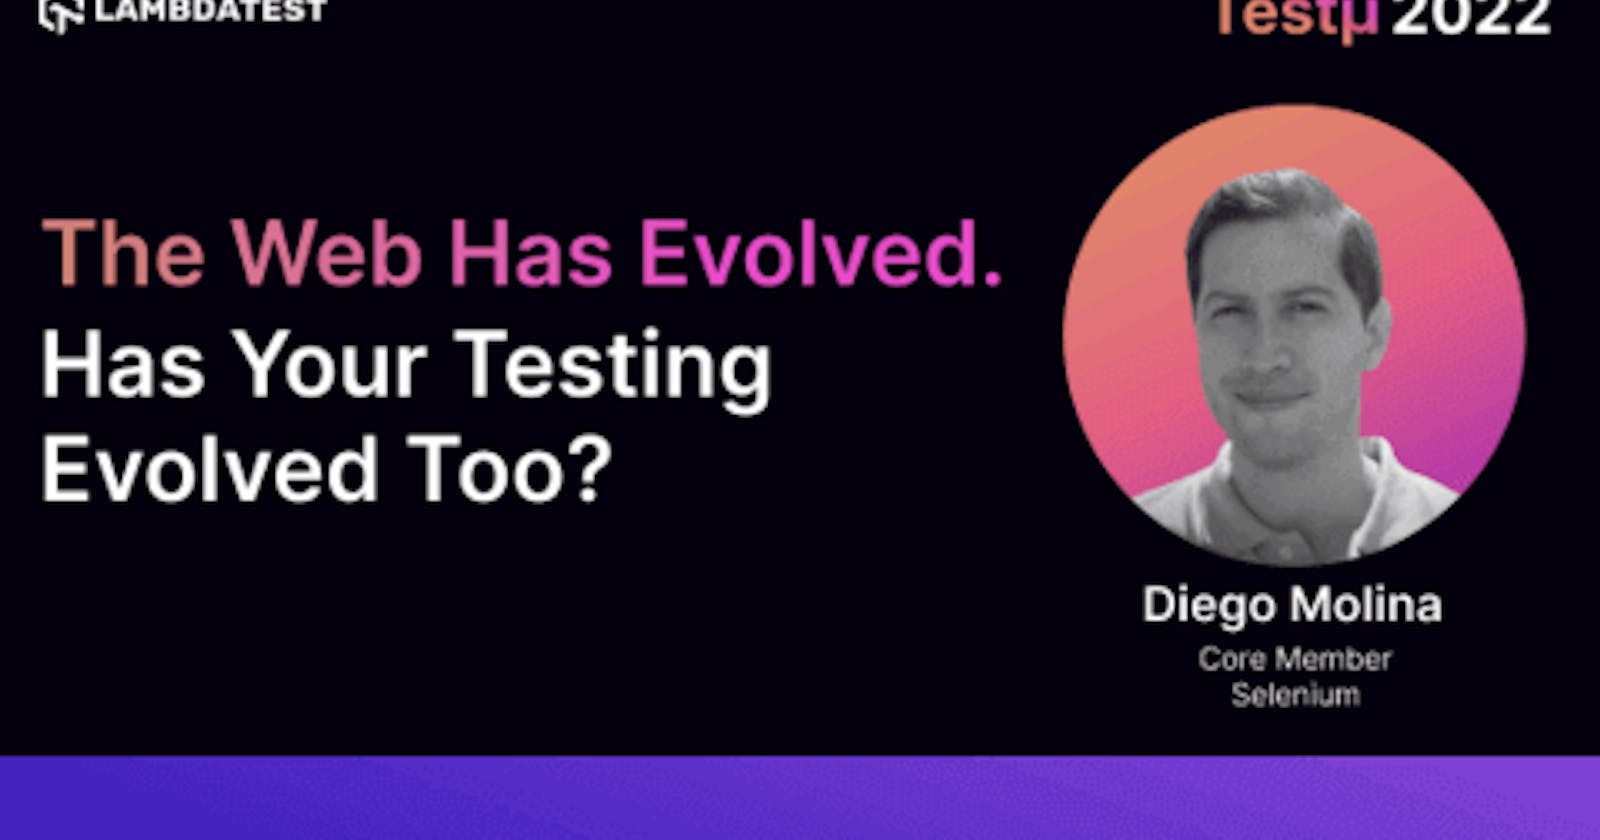 The Web Has Evolved. Has Your Testing Evolved Too?: Diego Molina [Testμ 2022]